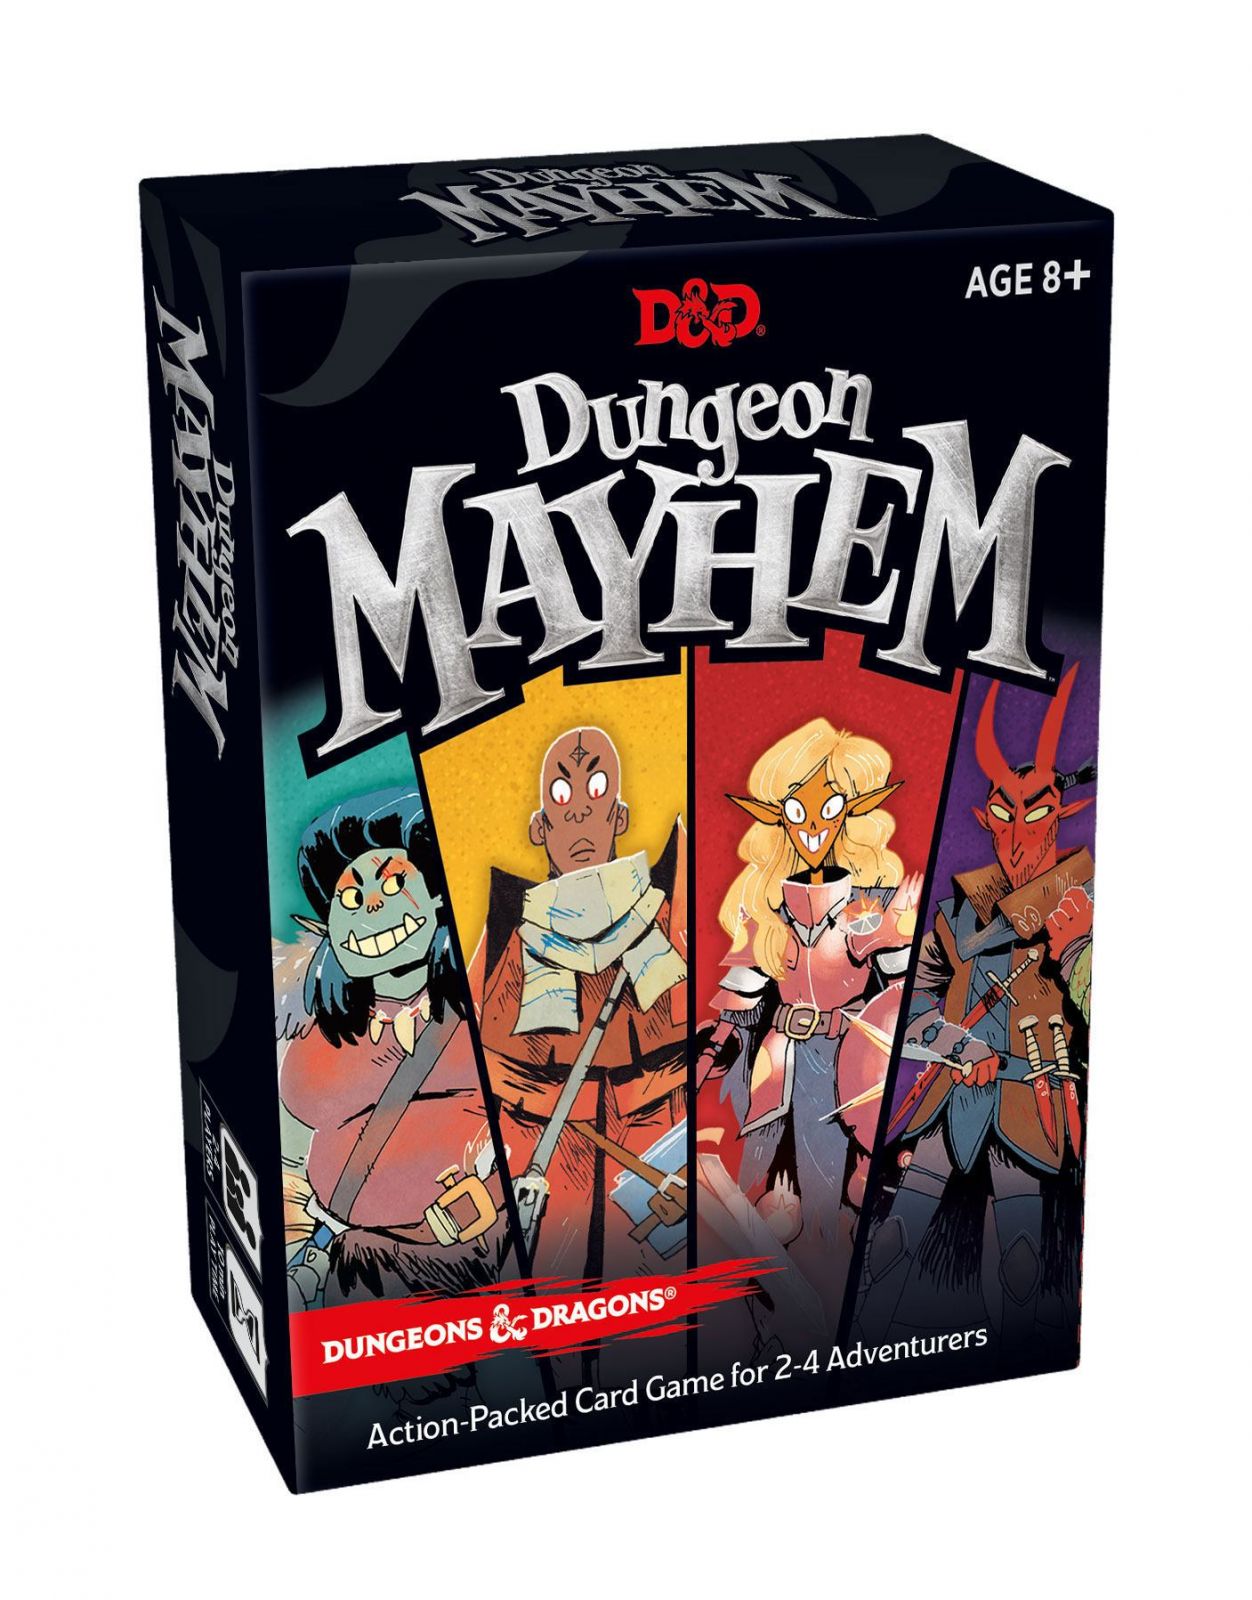 Dungeons & Dragons Card Game Dungeon Mayhem german Wizards of the Coast